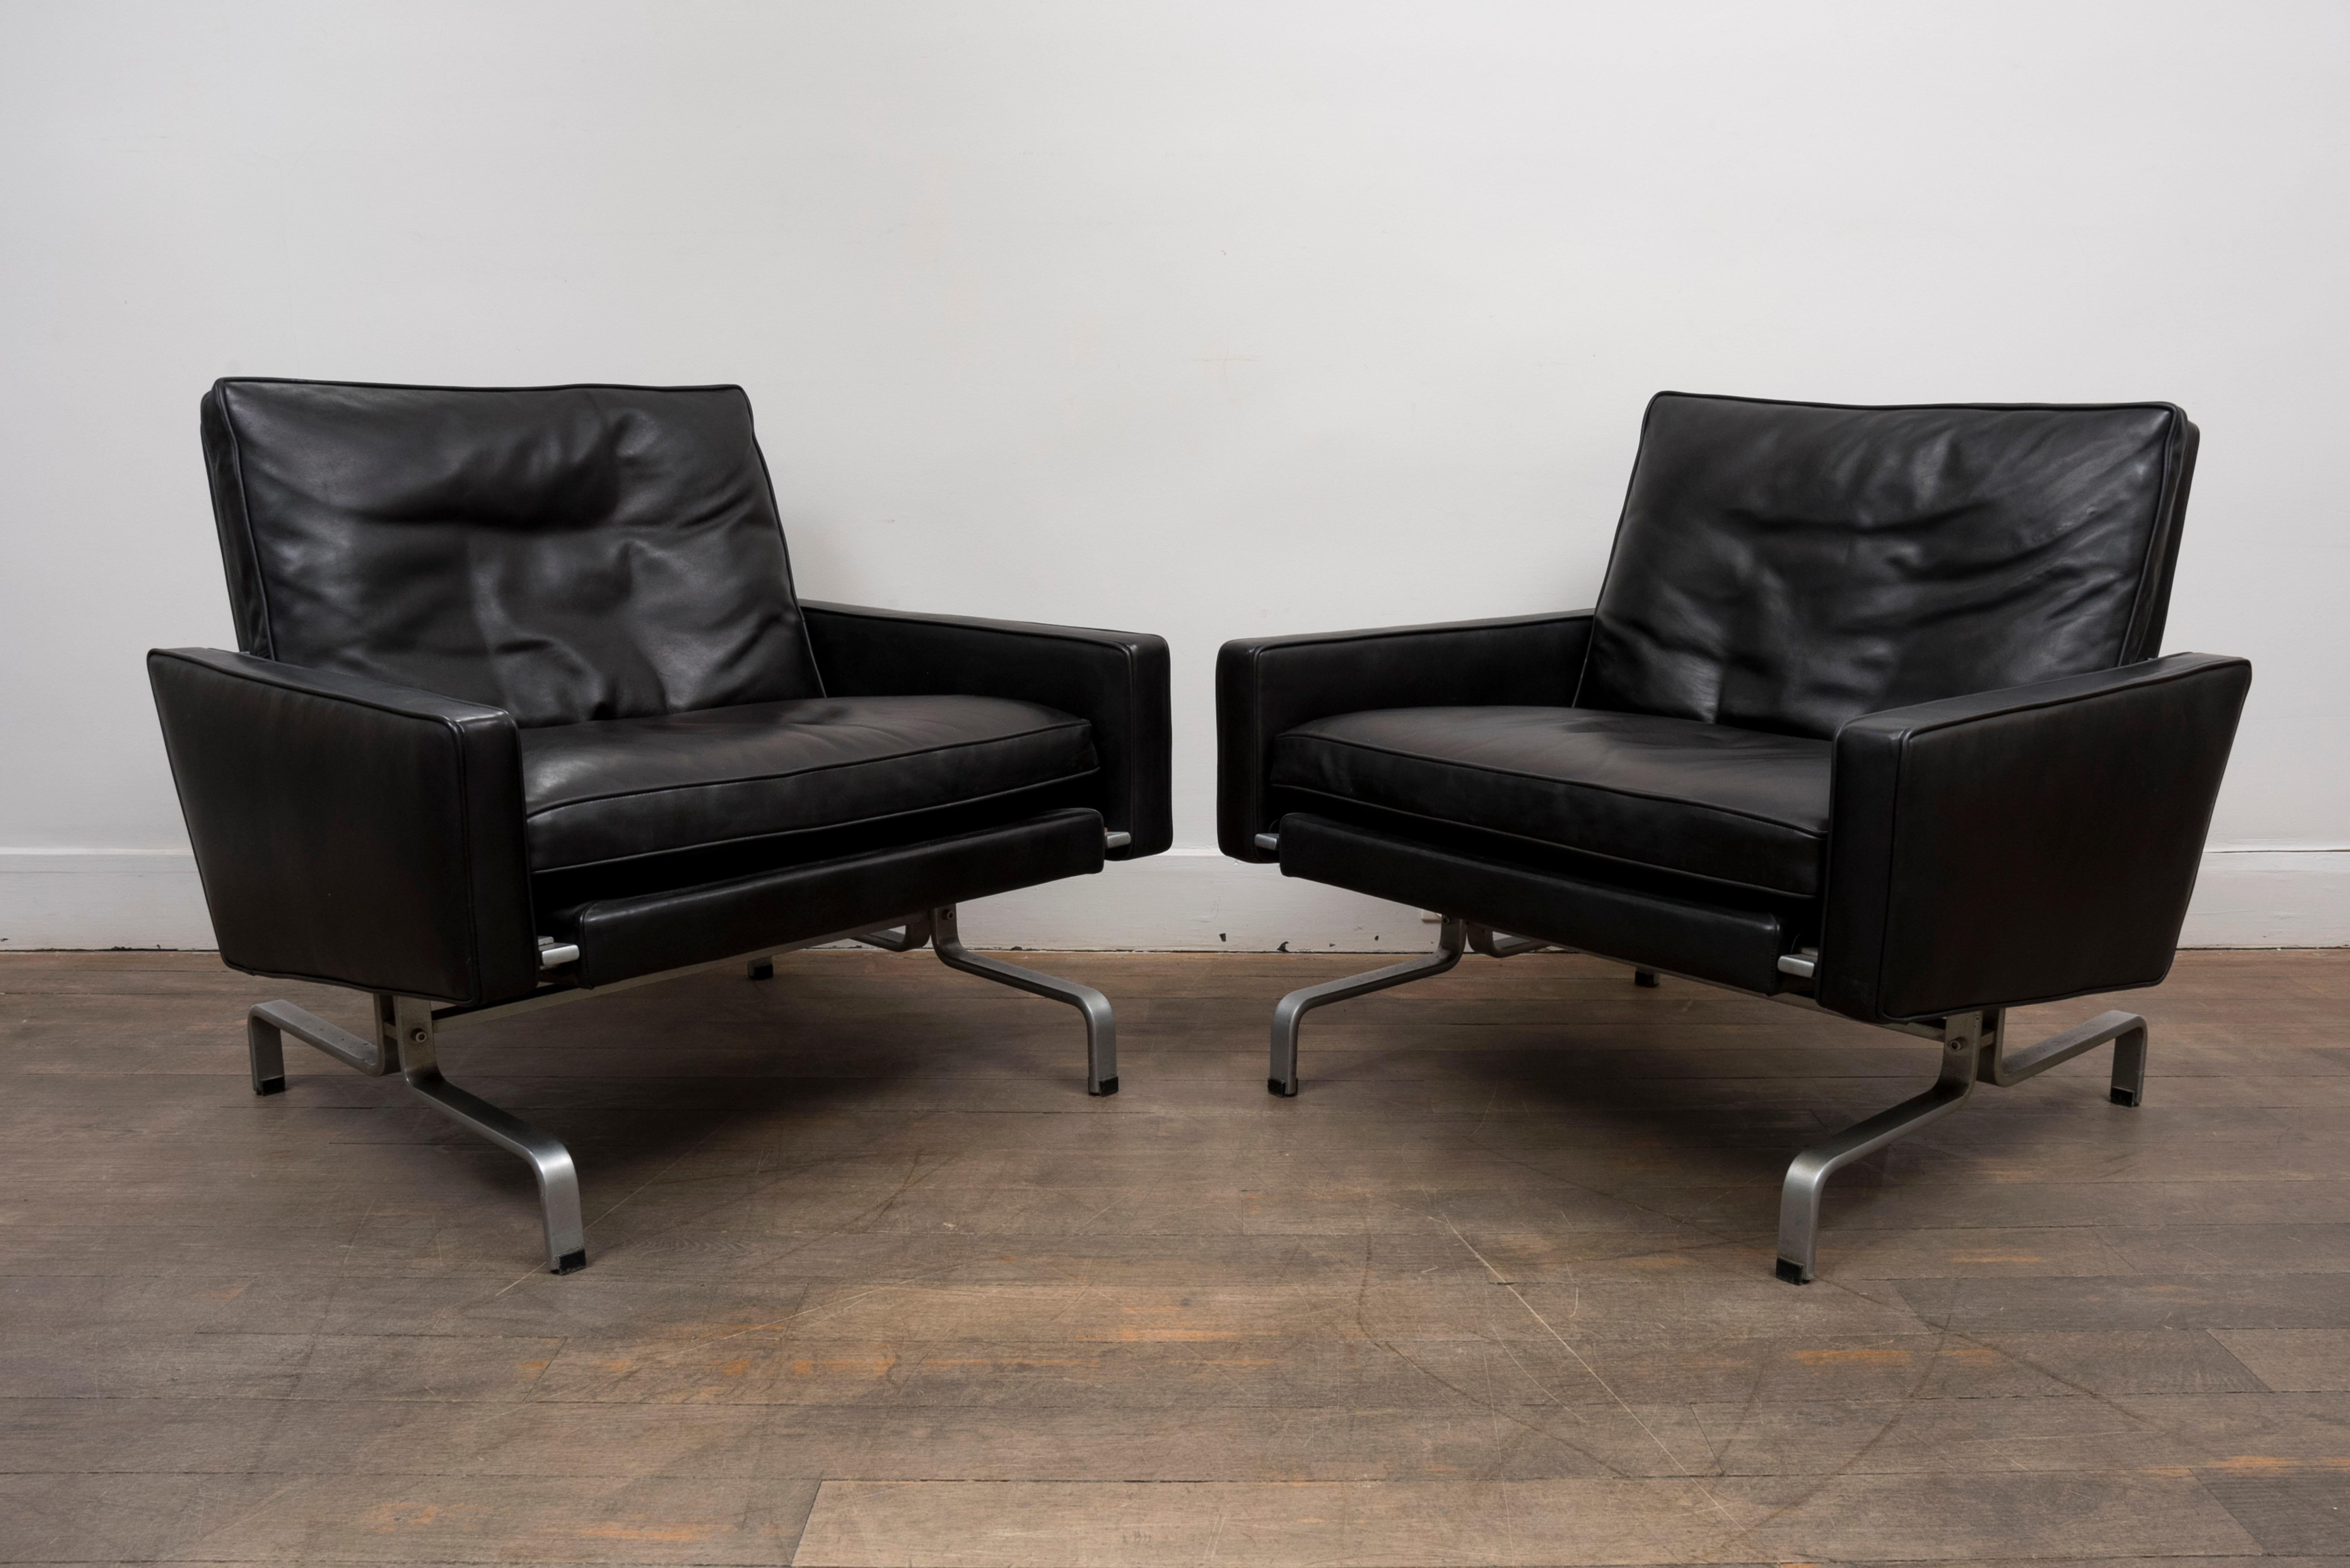 A pair of black leather lounge chairs
Model PK31/1
Design : Poul Kjærholm, 1958
Manufactured by E. Kold Christensen
Marked on metal foot
upholstered in black calfskin . 
Denmark, circa 1960.

Measures: Height 70 cm (27.6 in.)
Width 77 cm (30,32